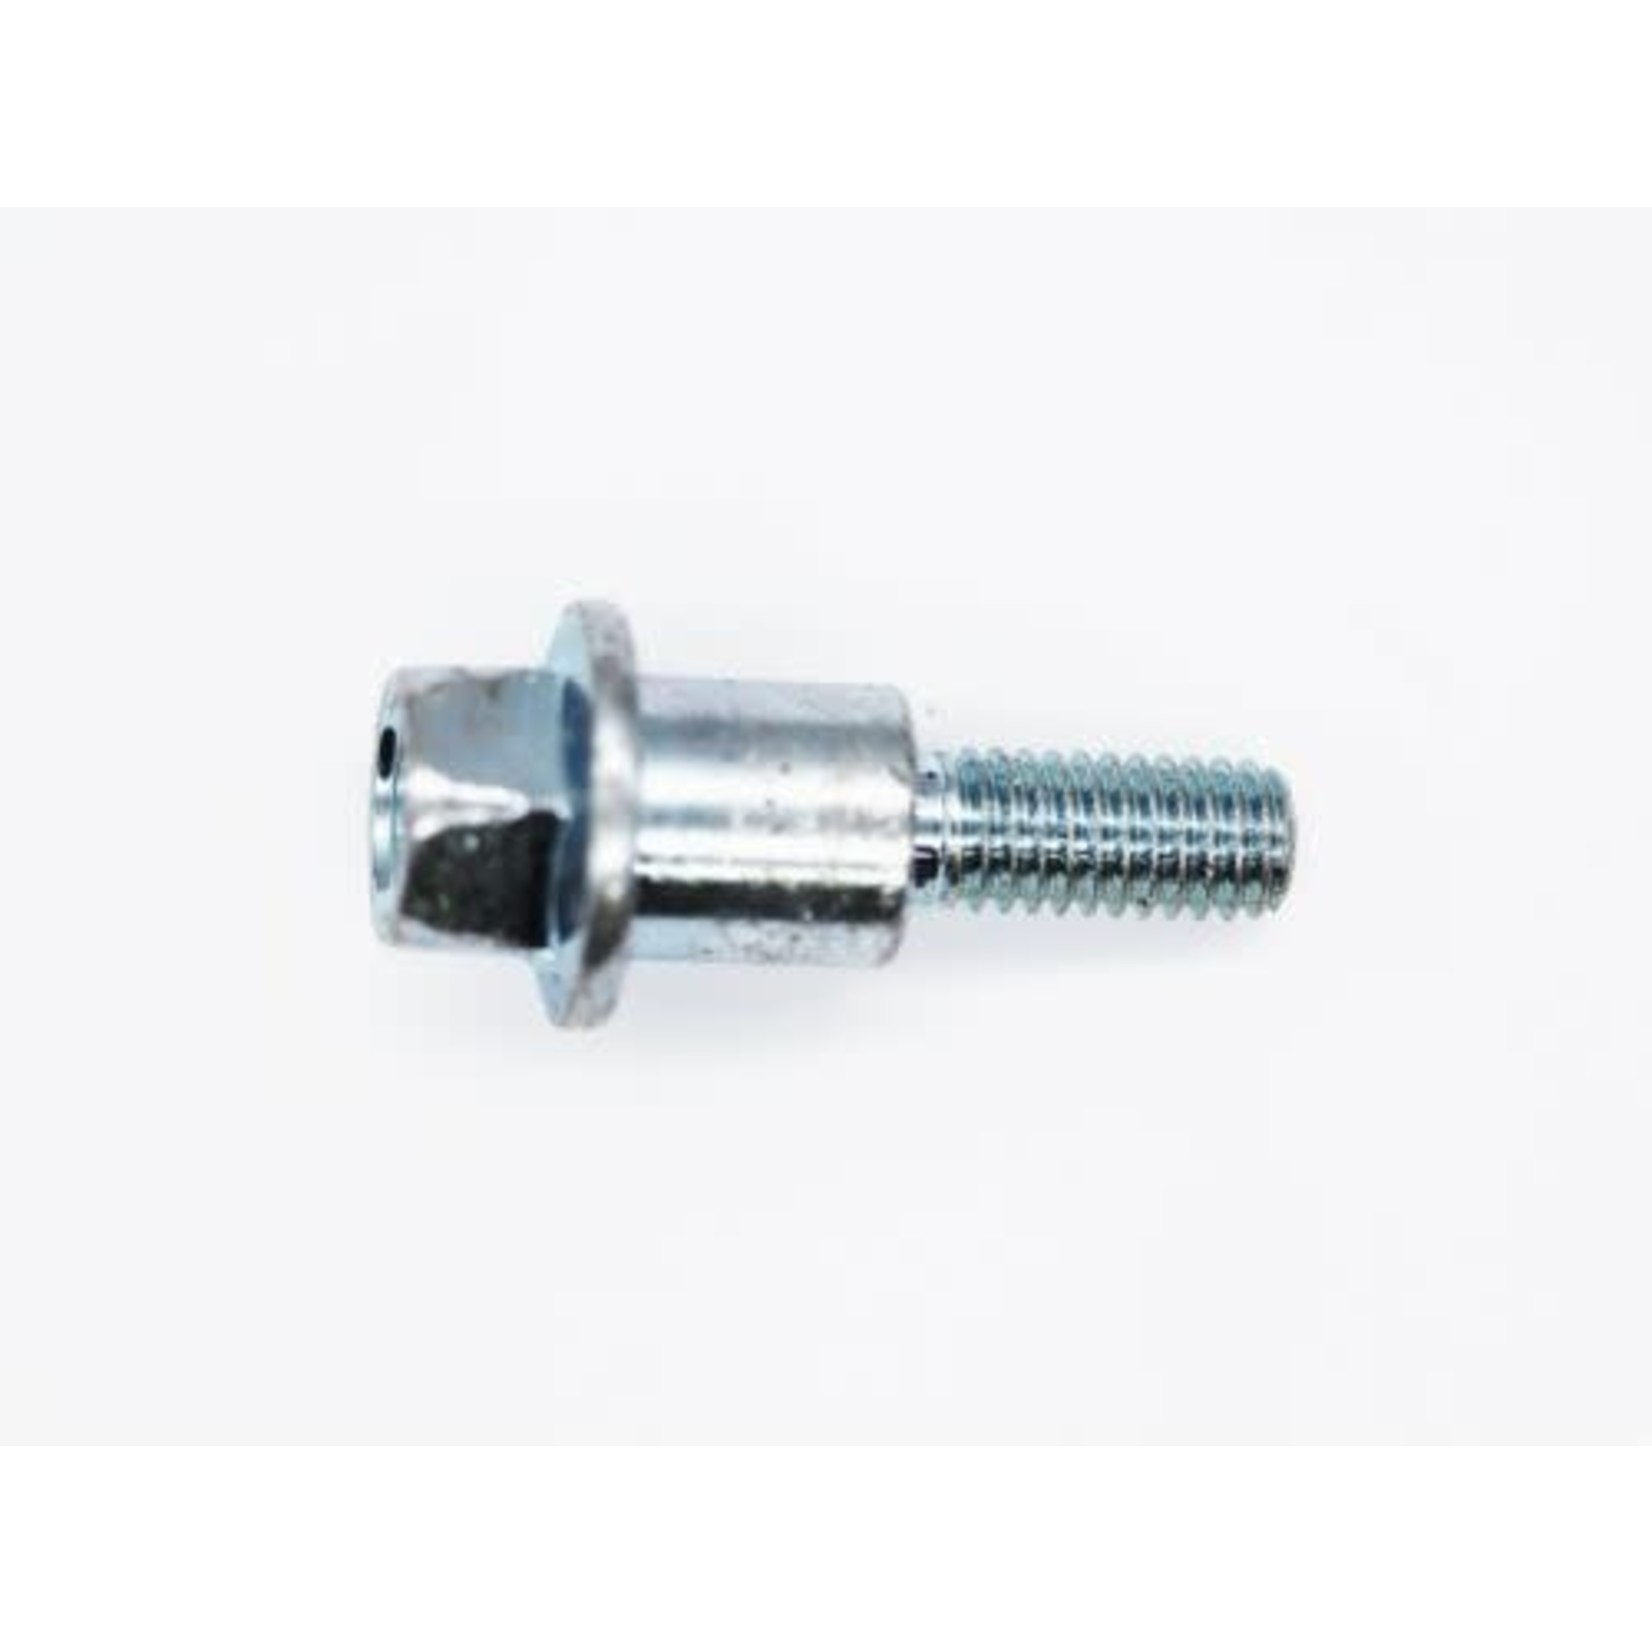 Parts Screw for Damping Pulley (A17)